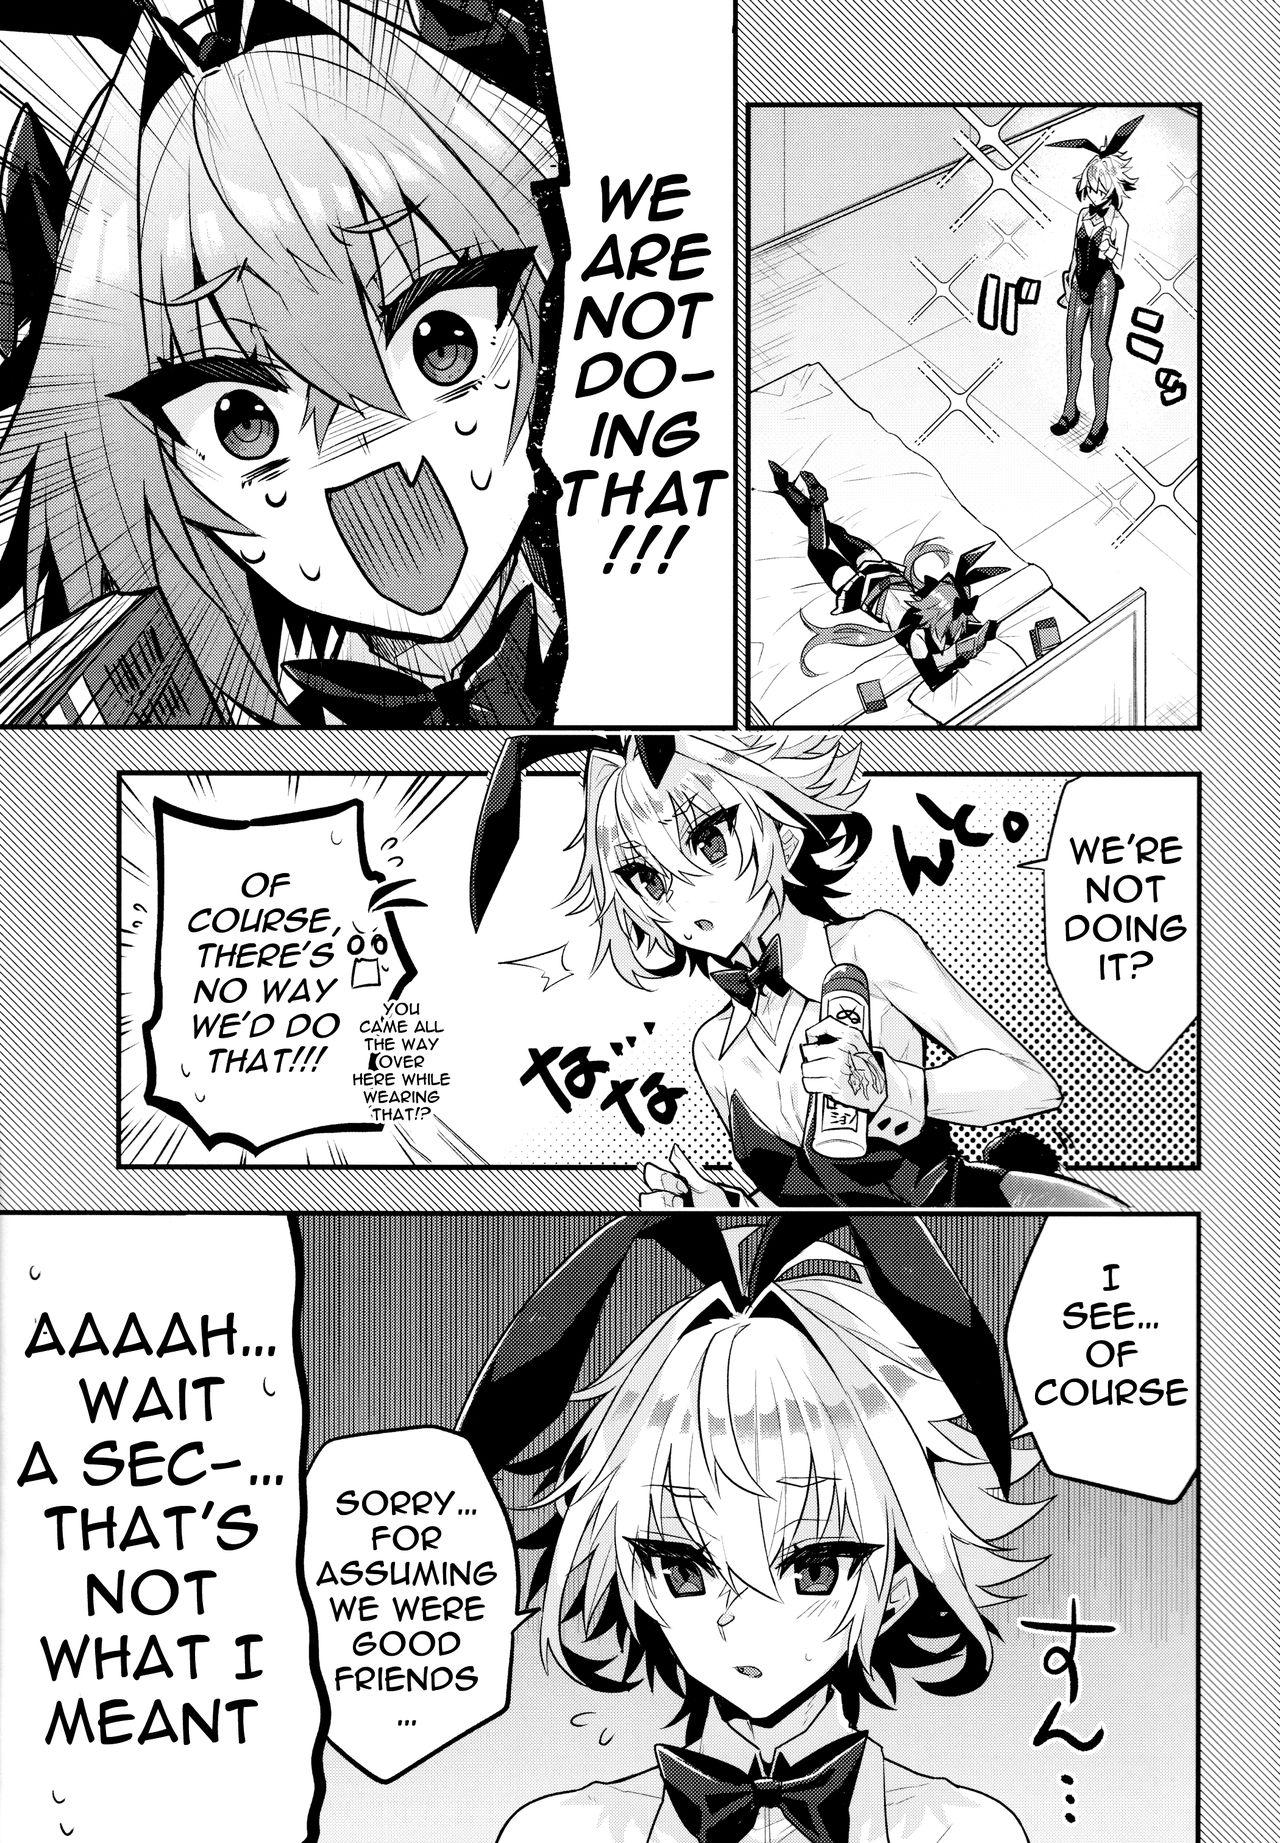 Eating Naka no Ii Shinyuu wa Bunny Cosplay Kijoui Koubi o Sururashii zo | Rider, I Heard That Good Friends Are Supposed To Have Cowgirl Sex While In Bunny Cosplay - Fate grand order Barely 18 Porn - Page 2